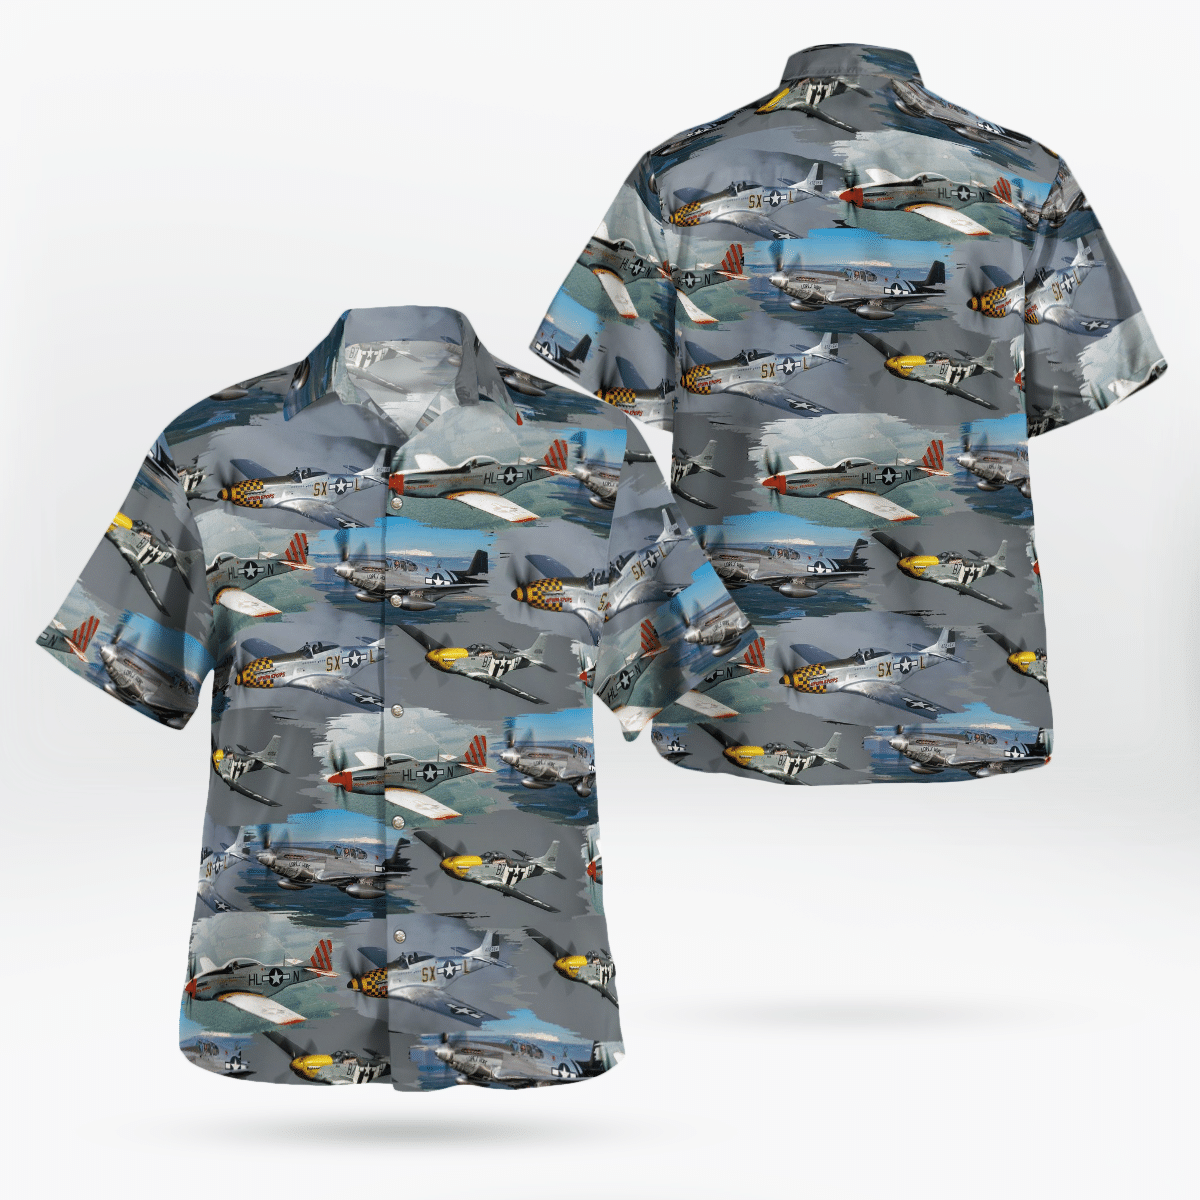 Shop now to find the perfect Hawaii Shirt for your hobby 85